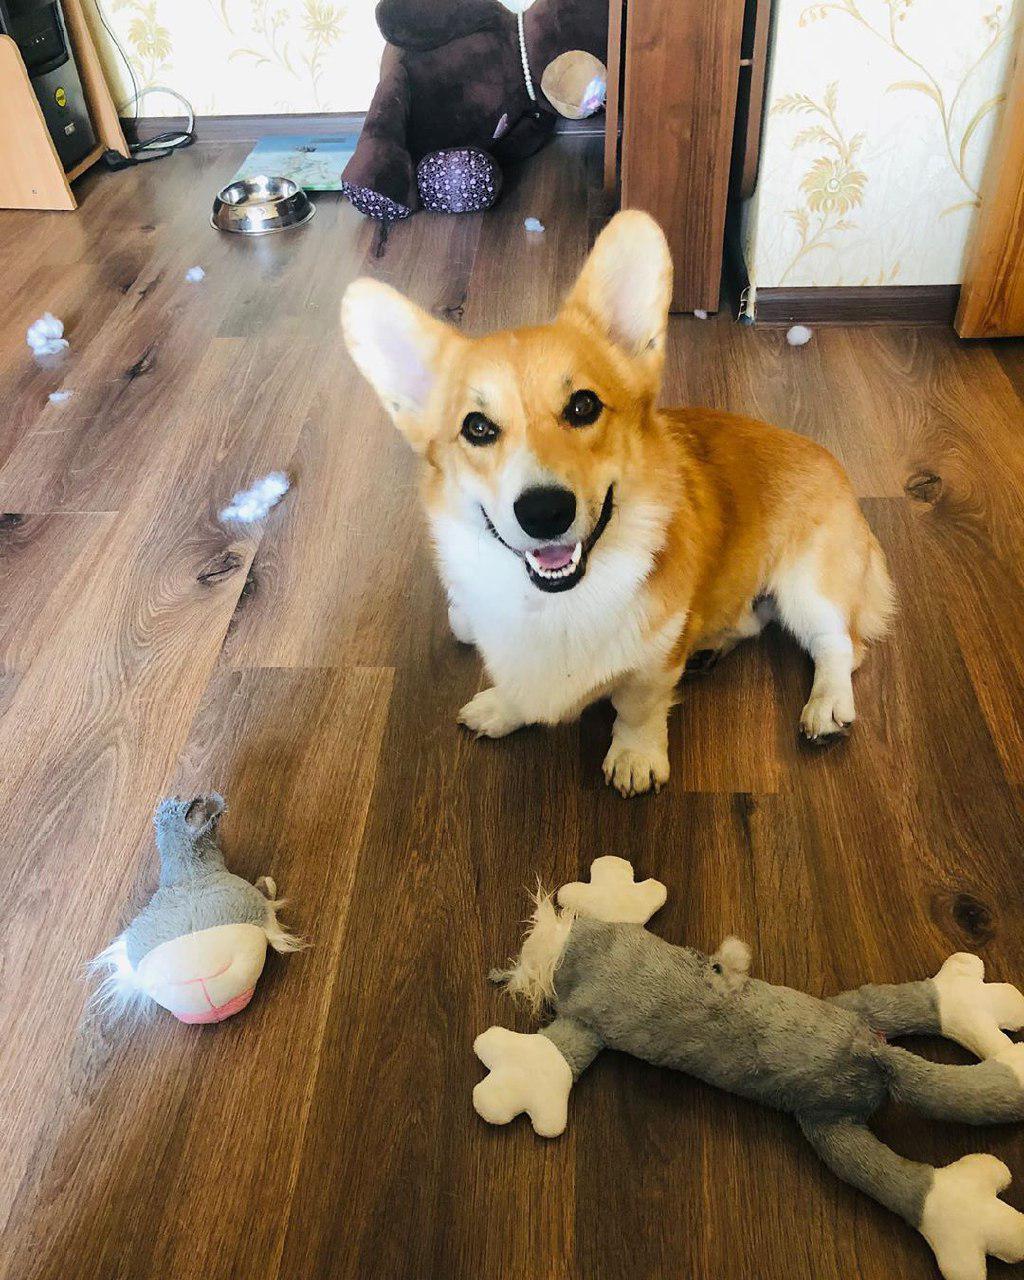 Corgi sitting on the floor with its destroyed stuffed toy